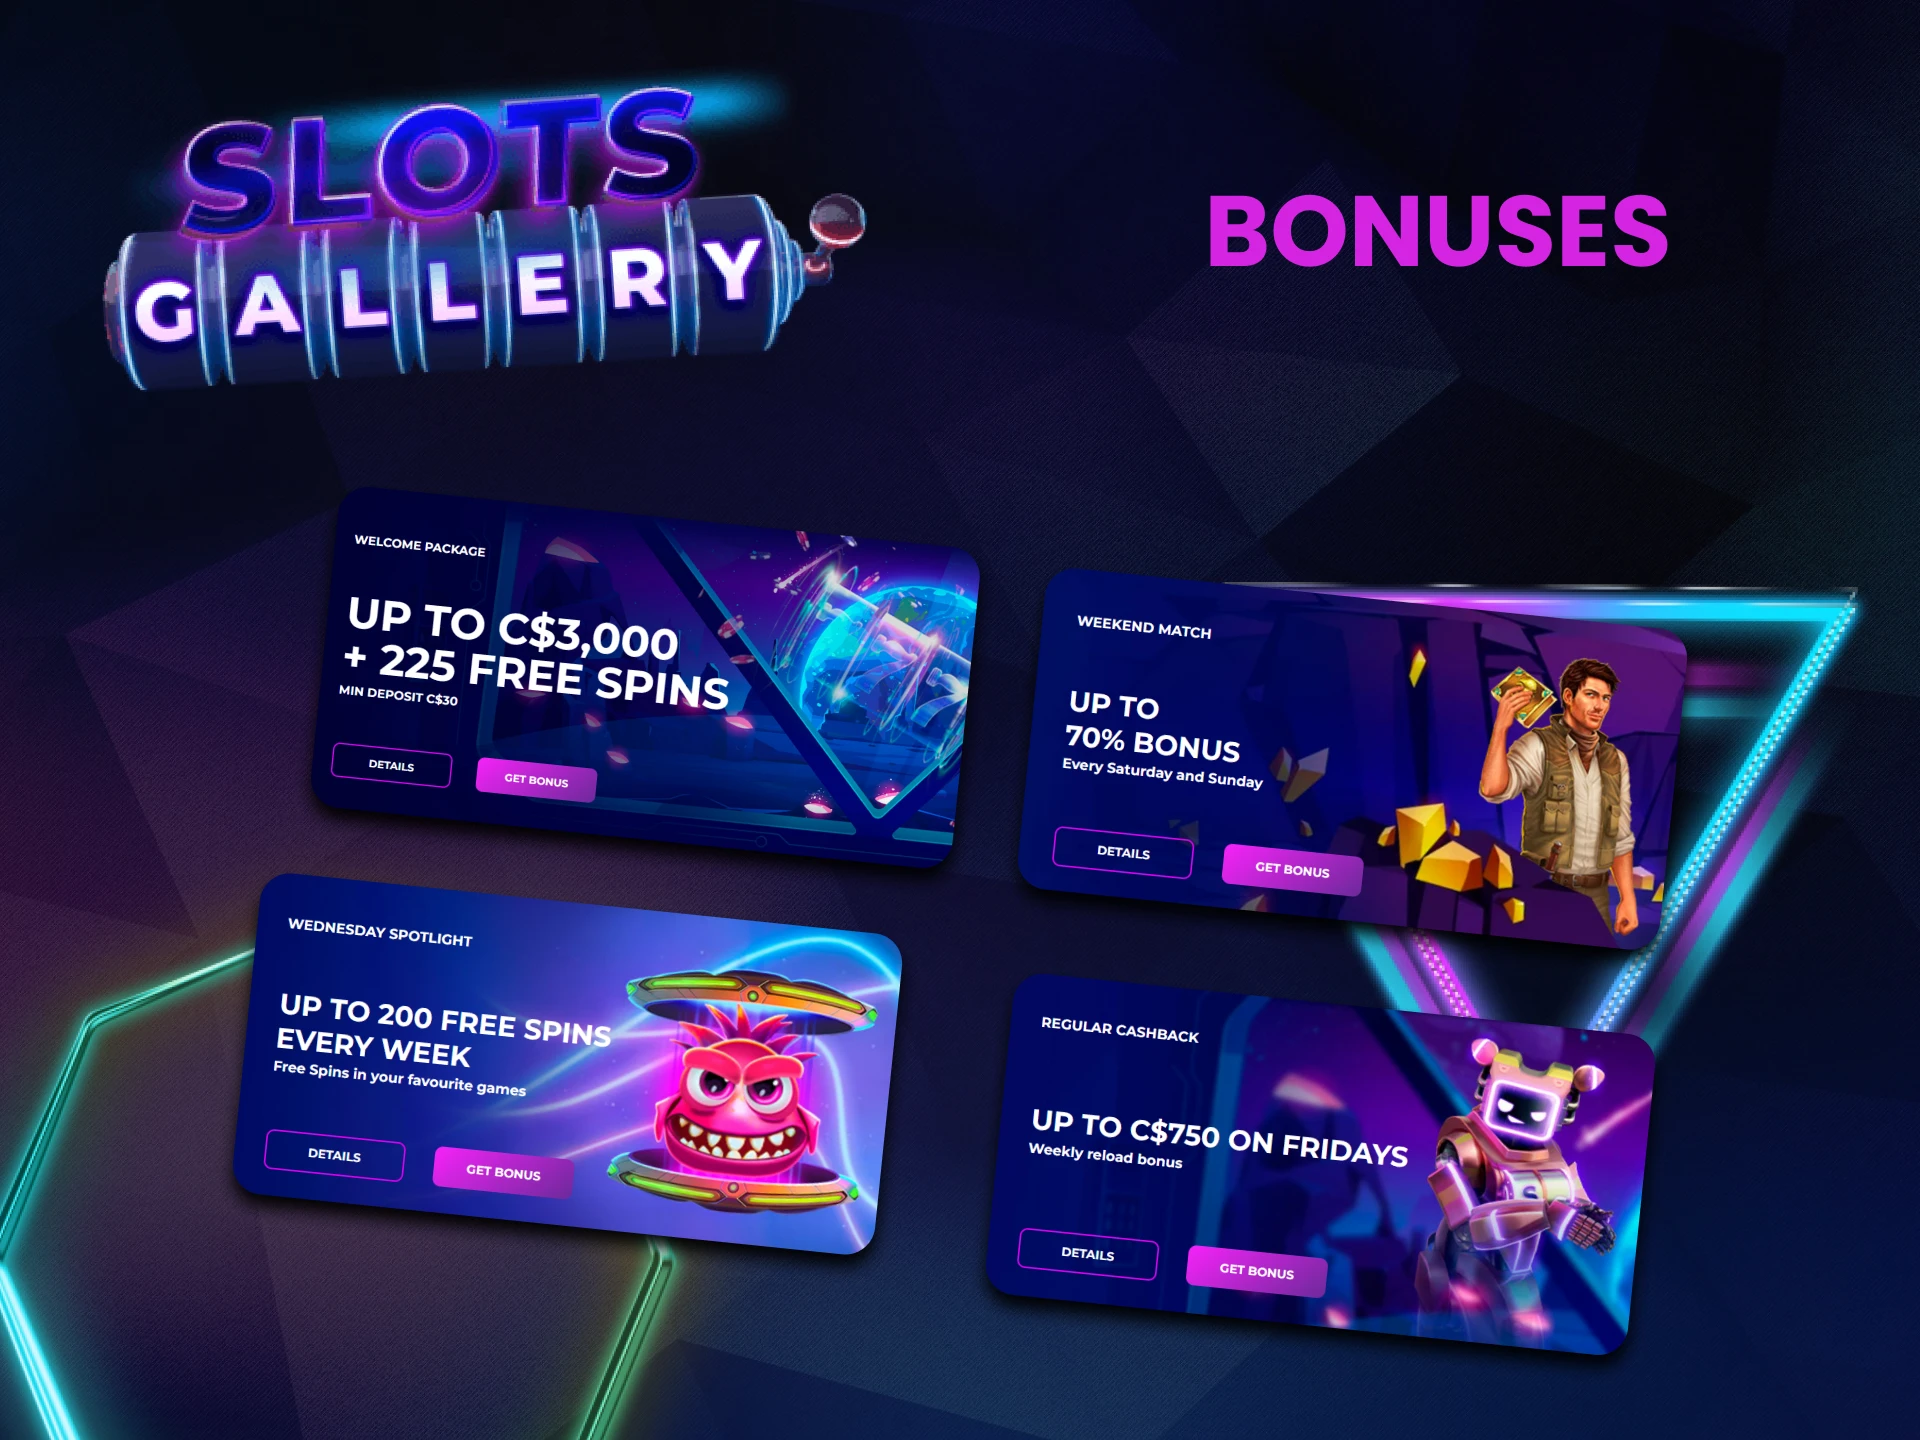 Get bonuses for slots from Slots Gallery.